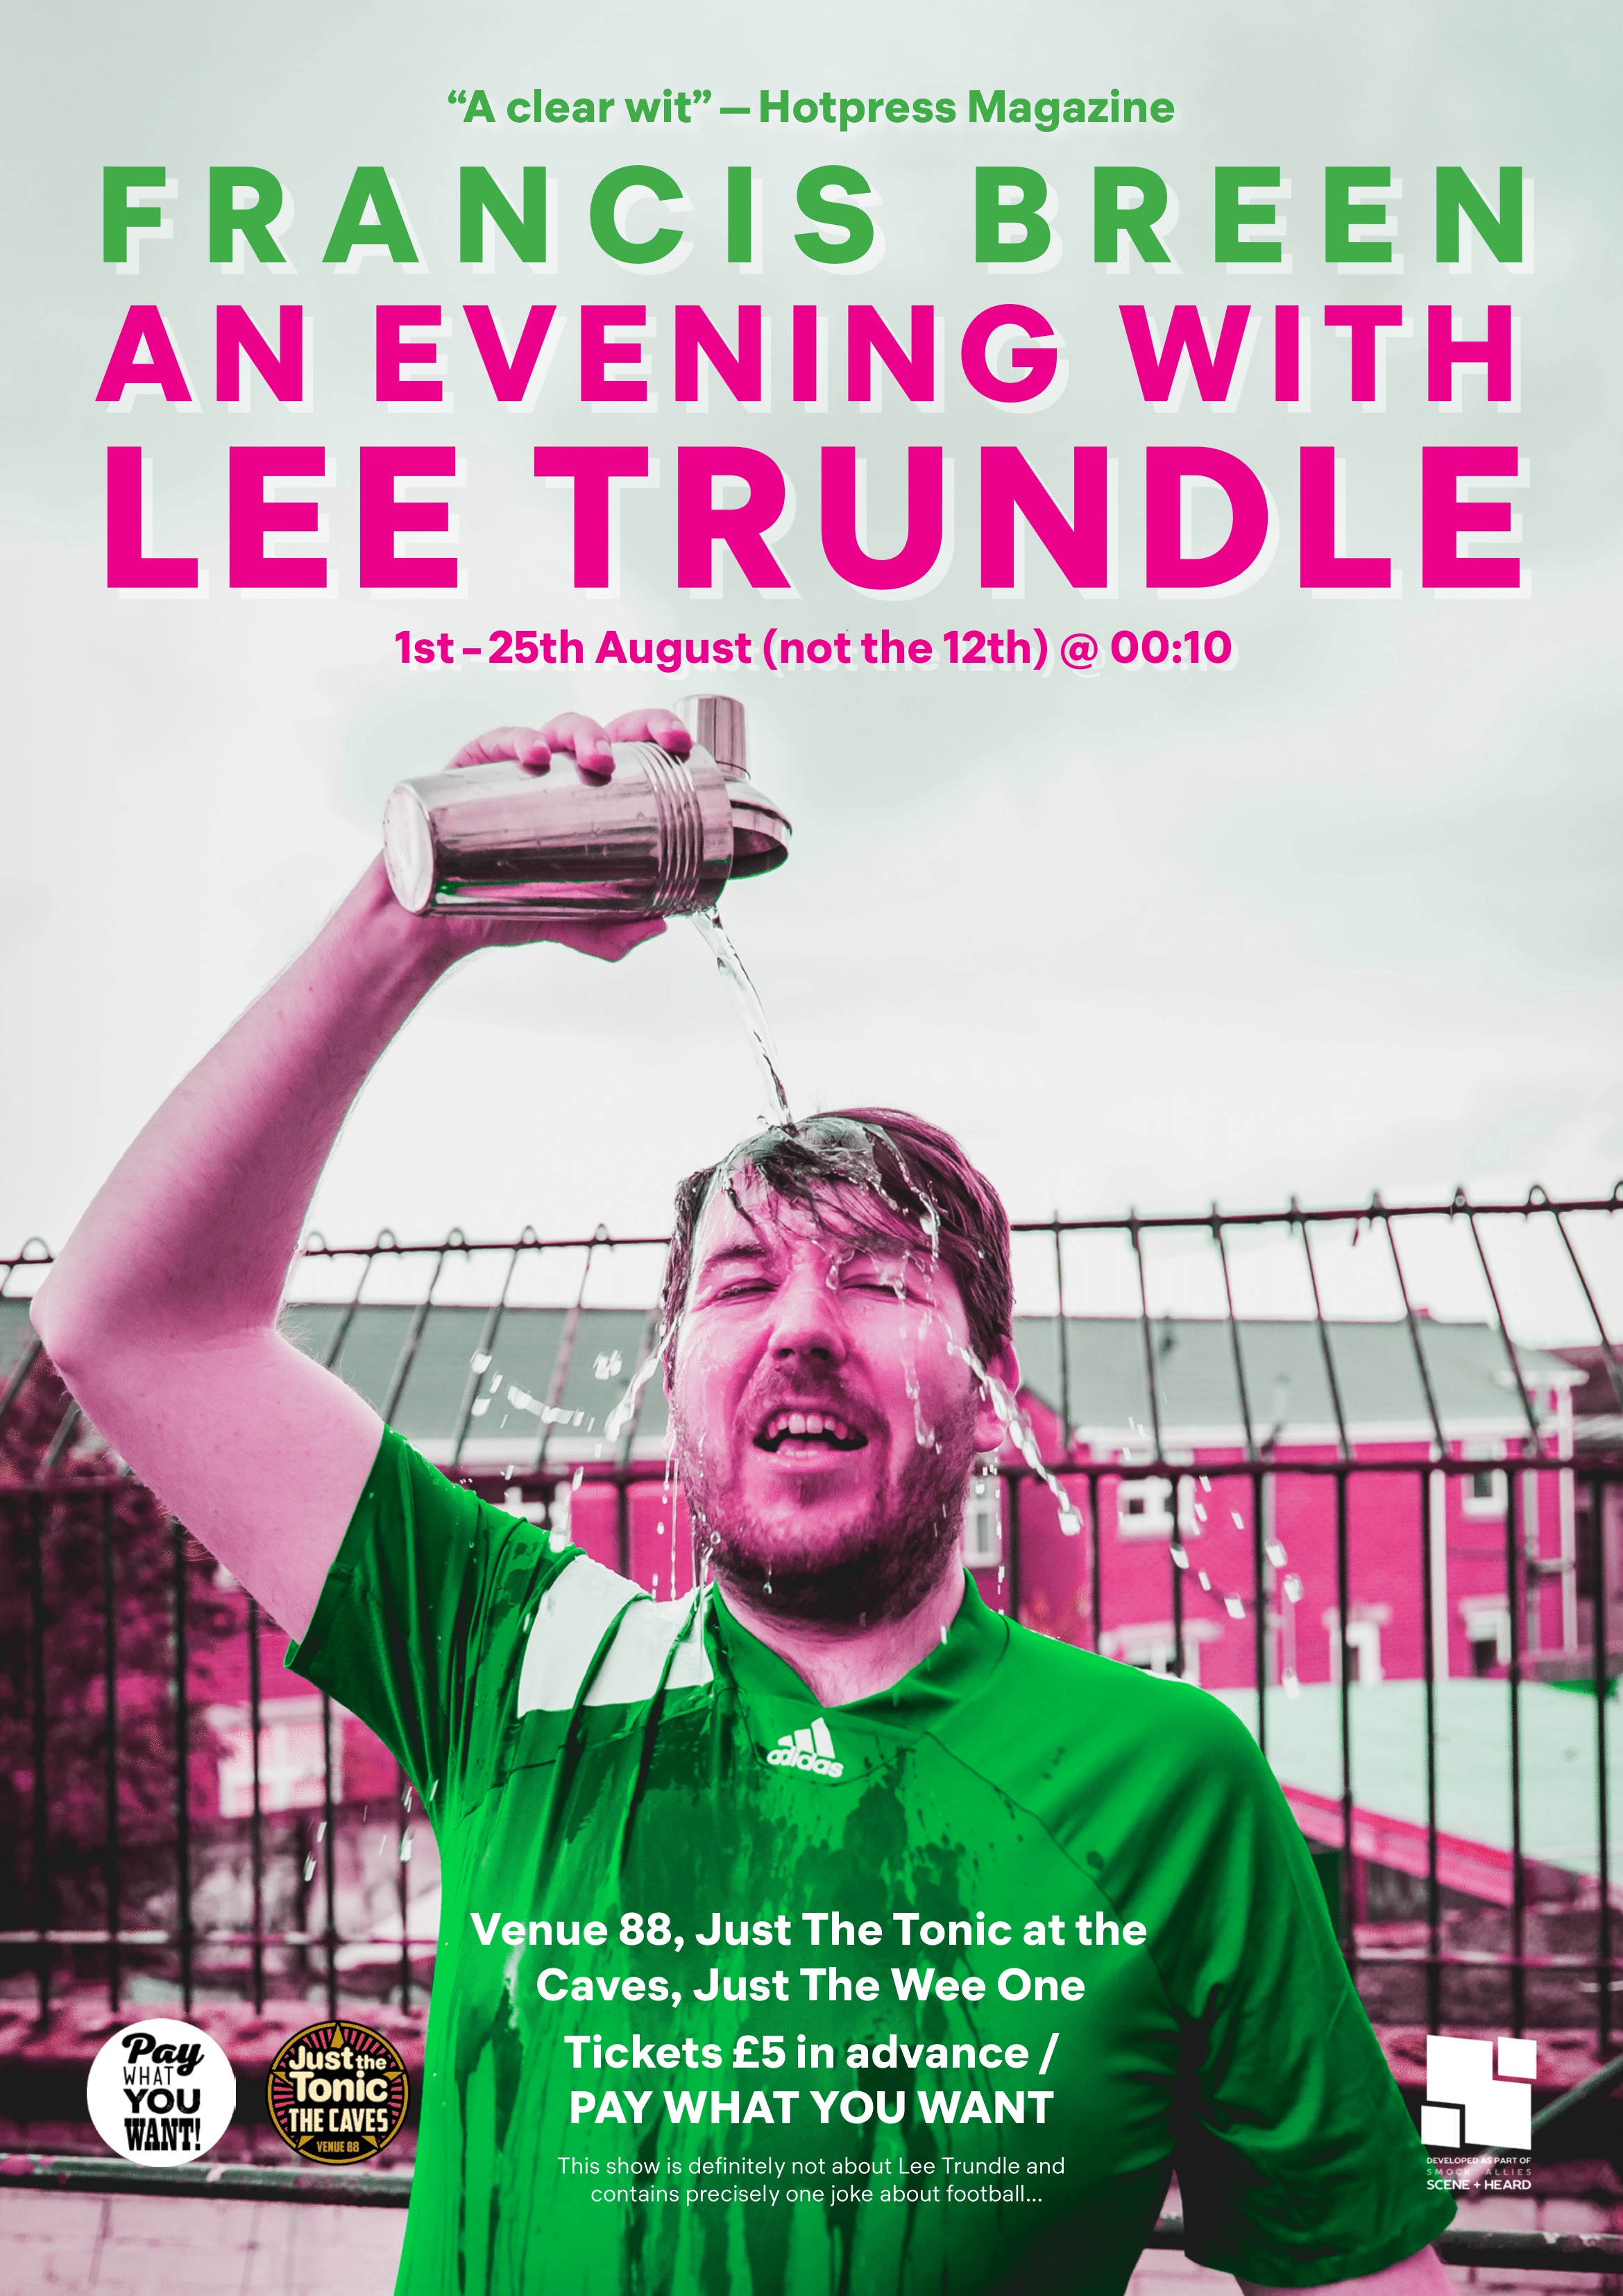 The poster for An Evening With Lee Trundle